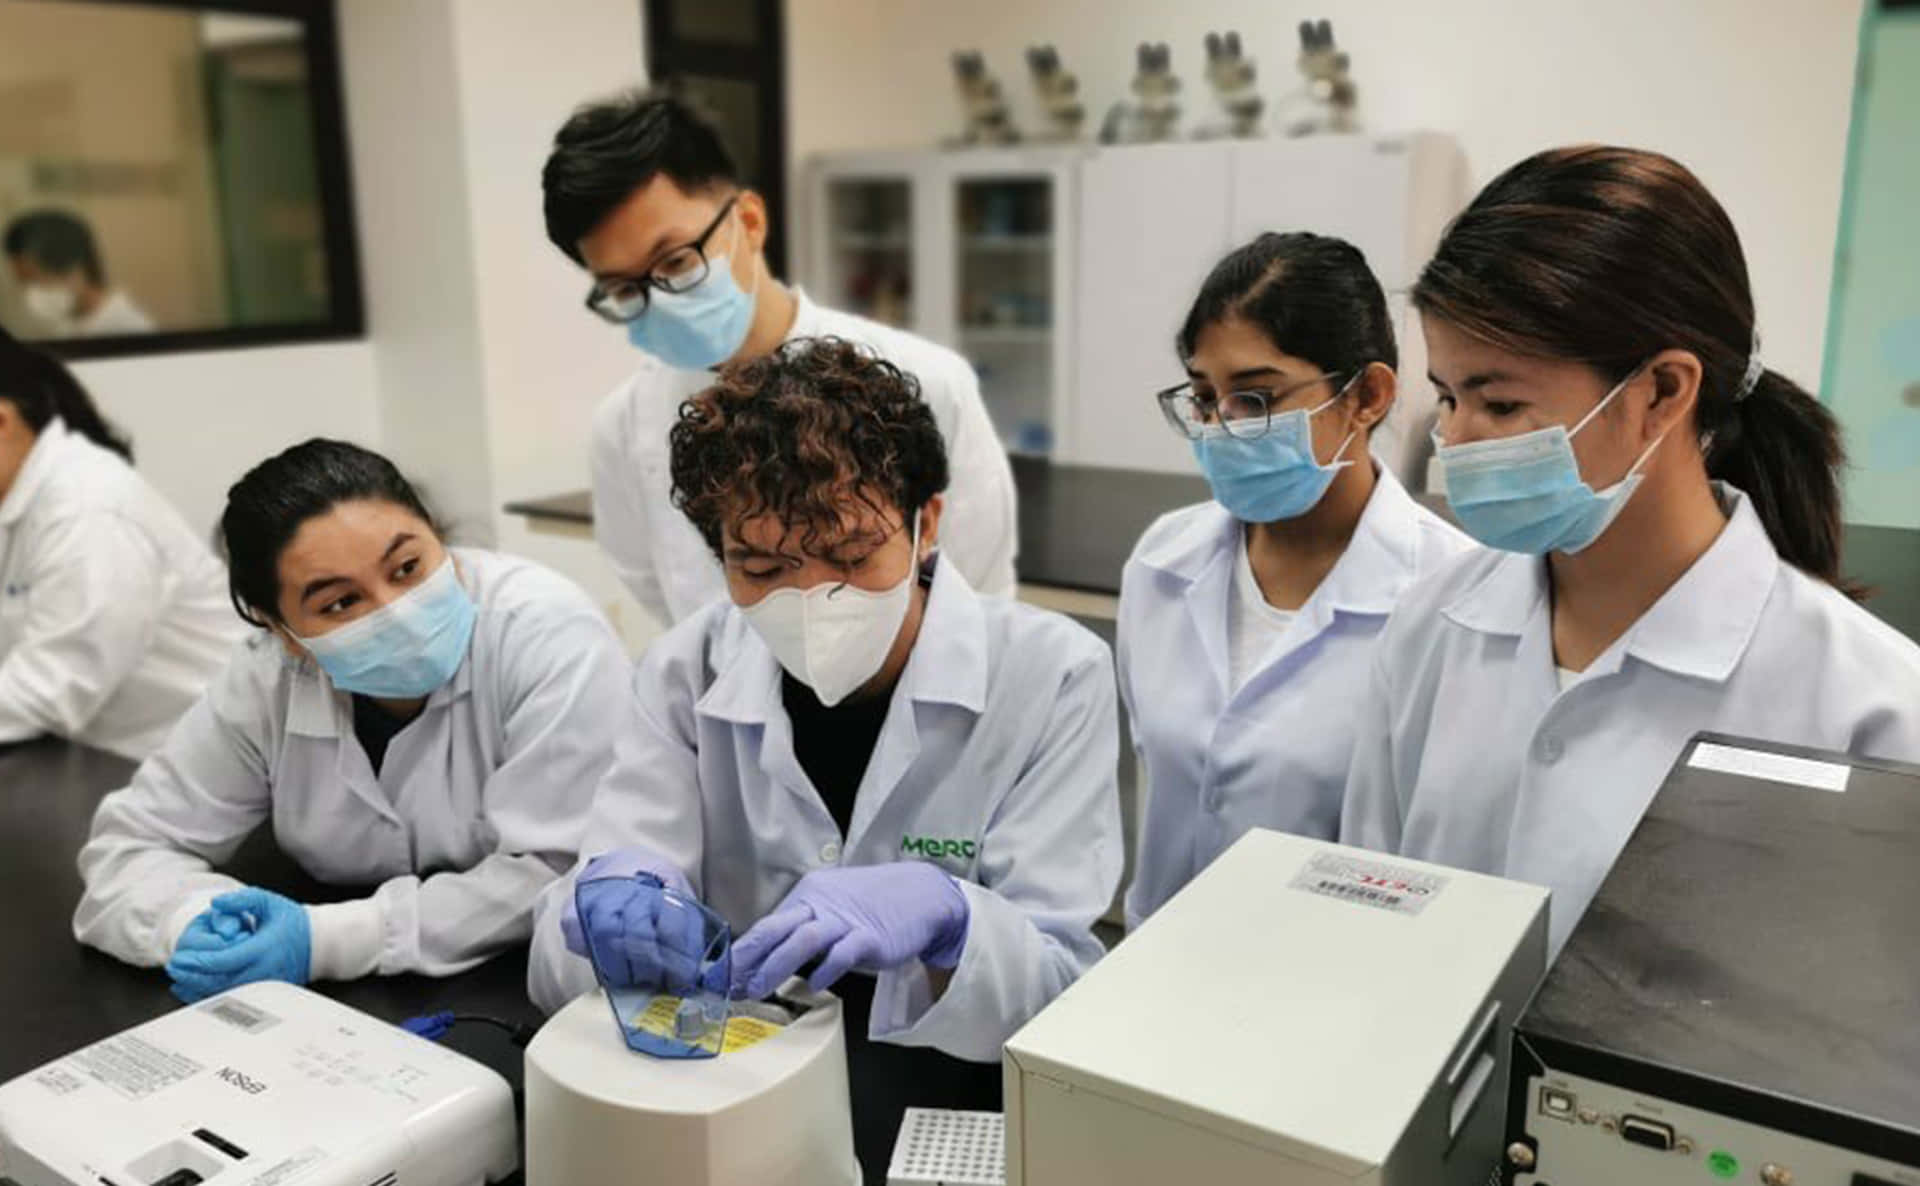 Students In Lab Coats Working On A Project